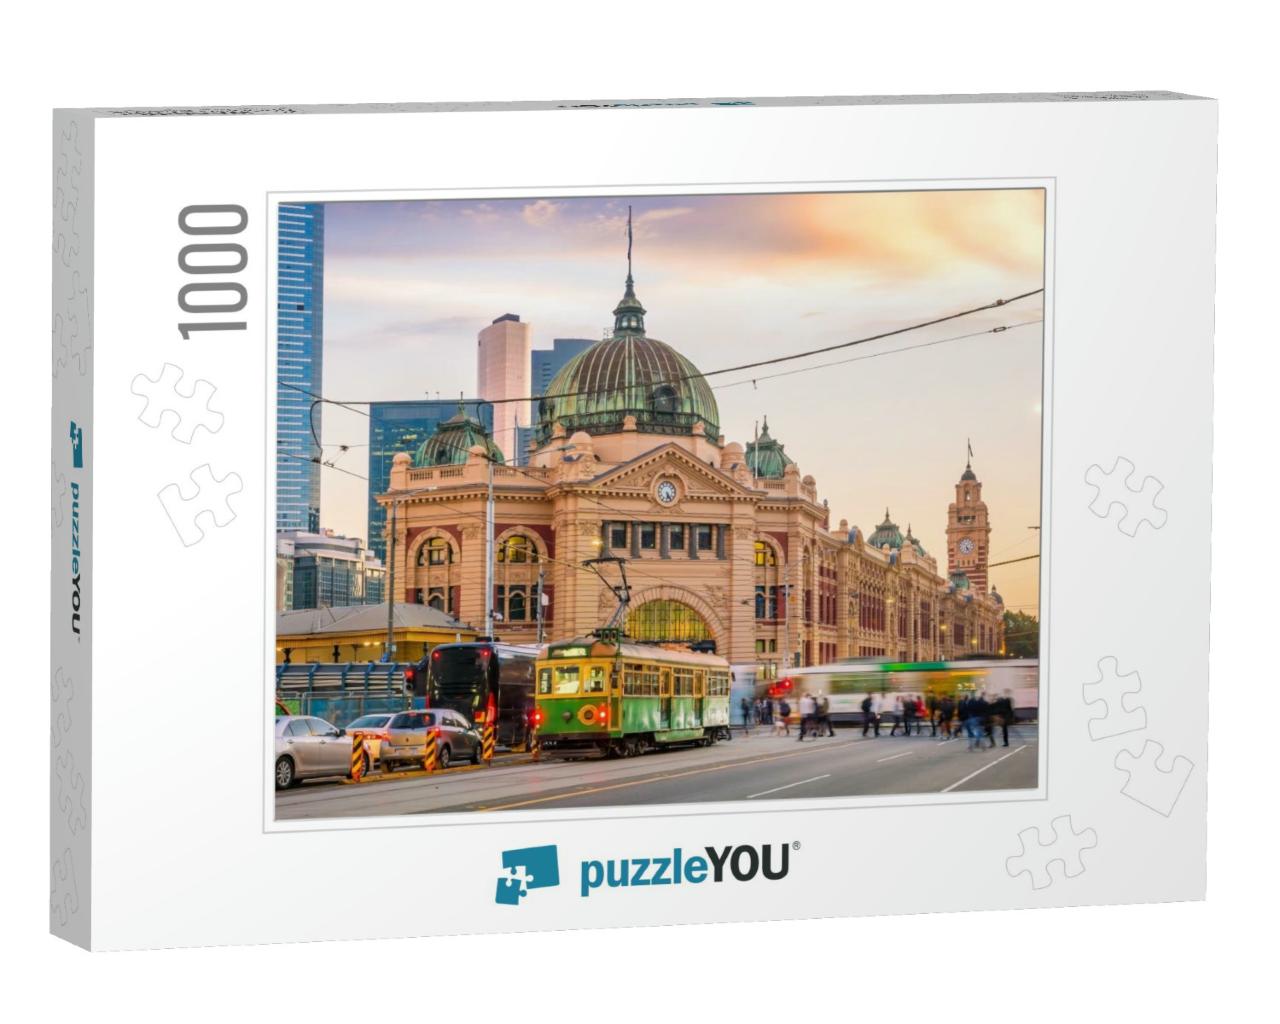 Melbourne Flinders Street Train Station in Australia At S... Jigsaw Puzzle with 1000 pieces